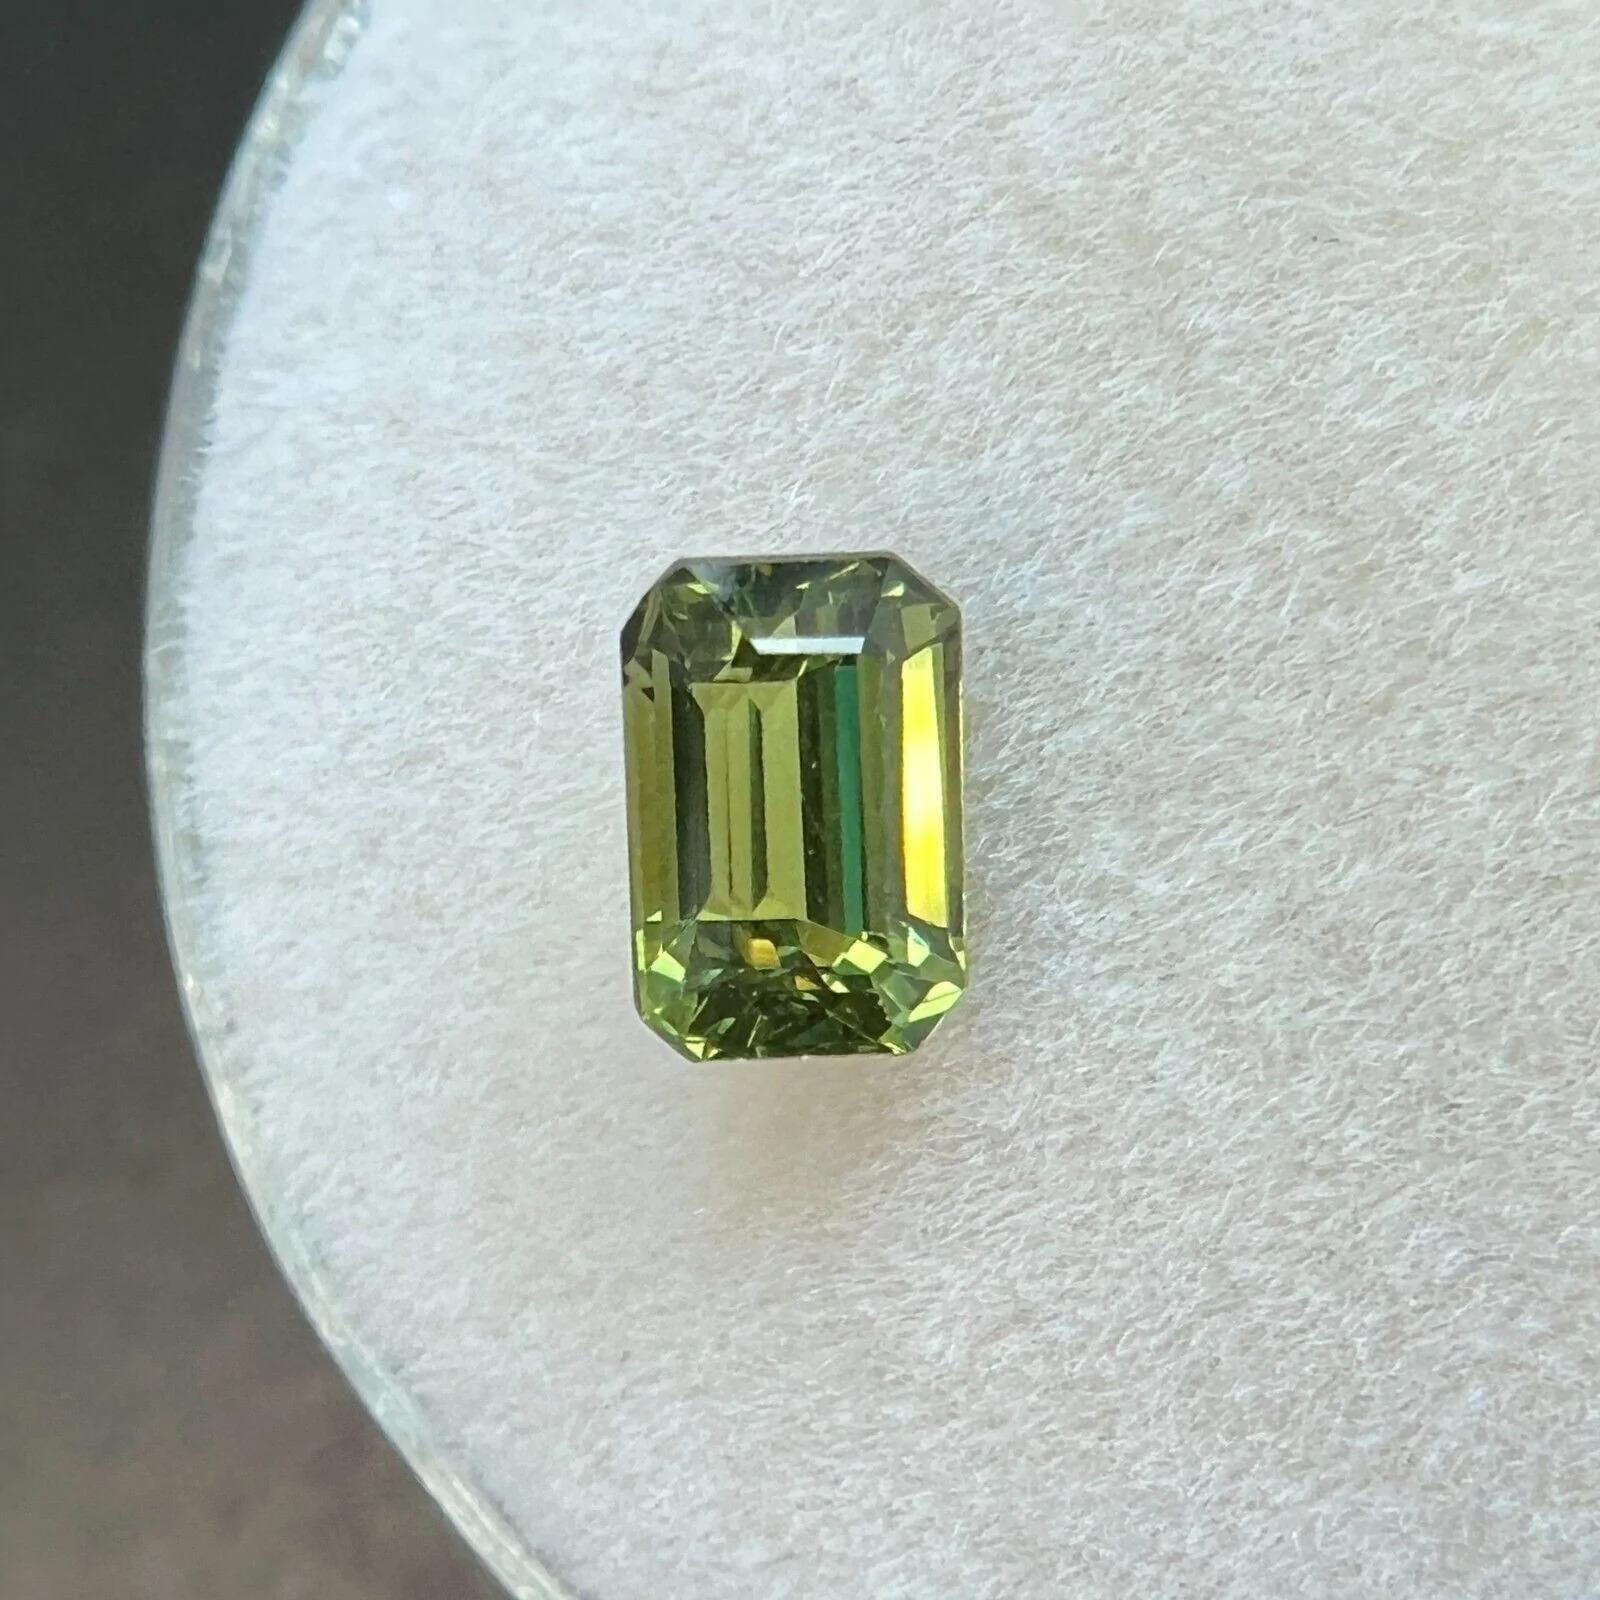 GIA Certified 1.01 Untreated Vivid Green Yellow Sapphire Emerald Octagon Cut Gem

GIA Certified Untreated Green Yellow Sapphire Gemstone. 
1.01 Carat unheated sapphire with a beautiful VIVID green yellow colour. Fully certified by GIA confirming